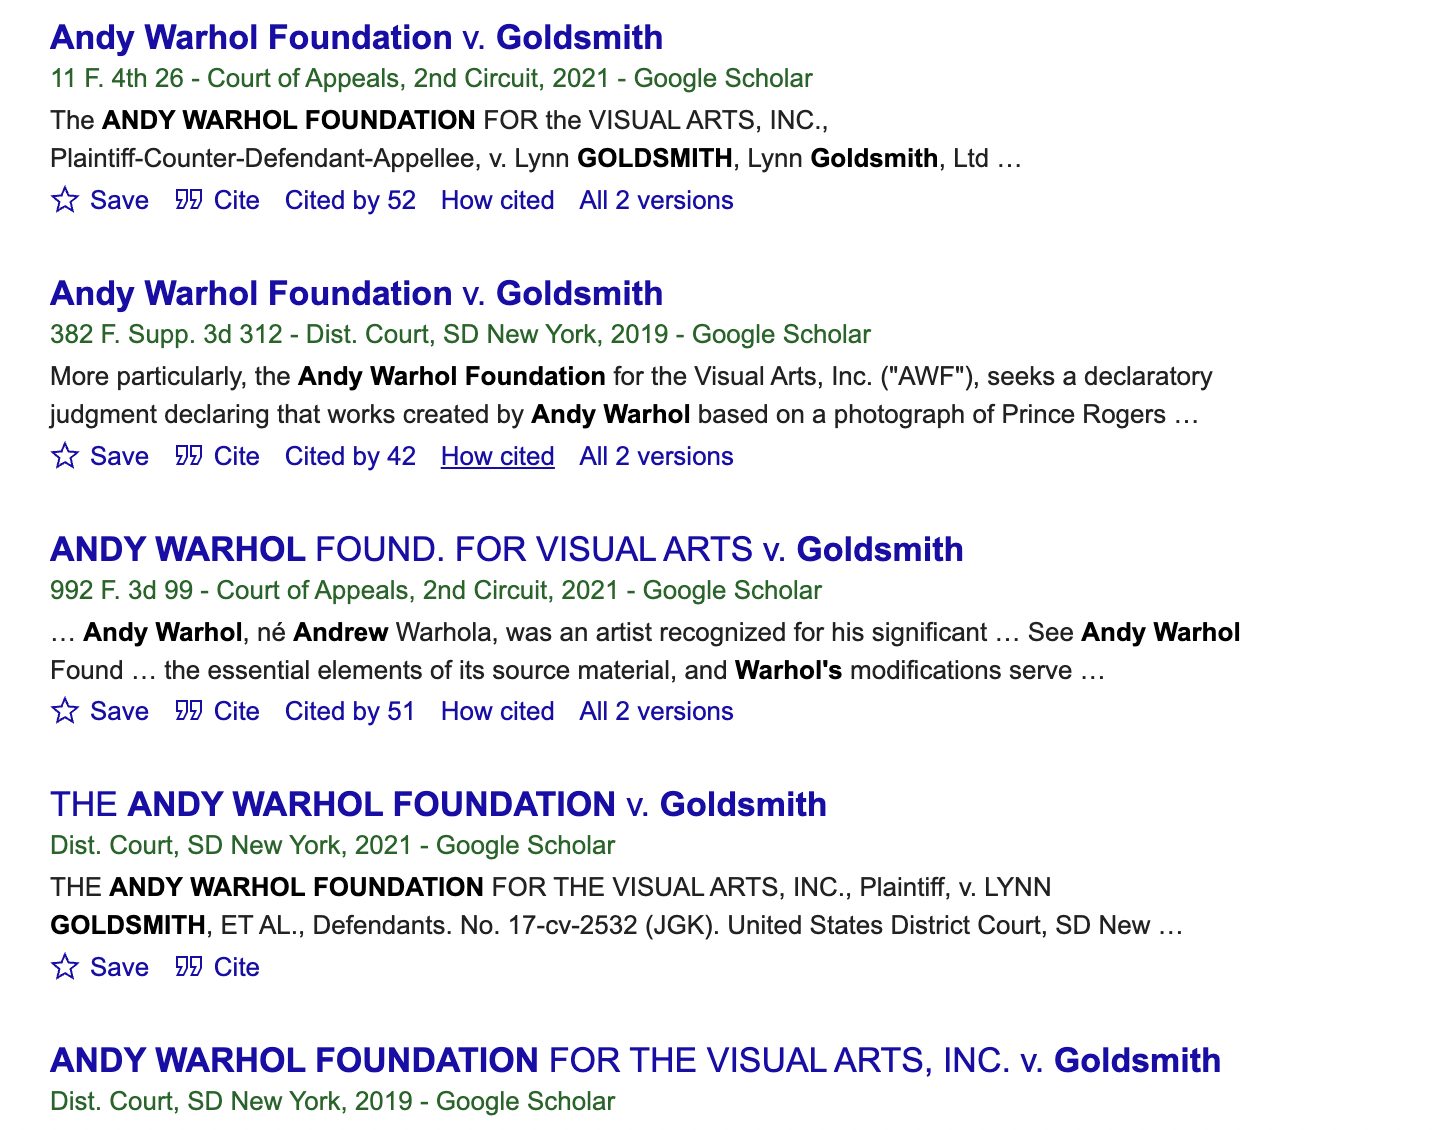 Screen shot from Google scholar of different Warhol cases